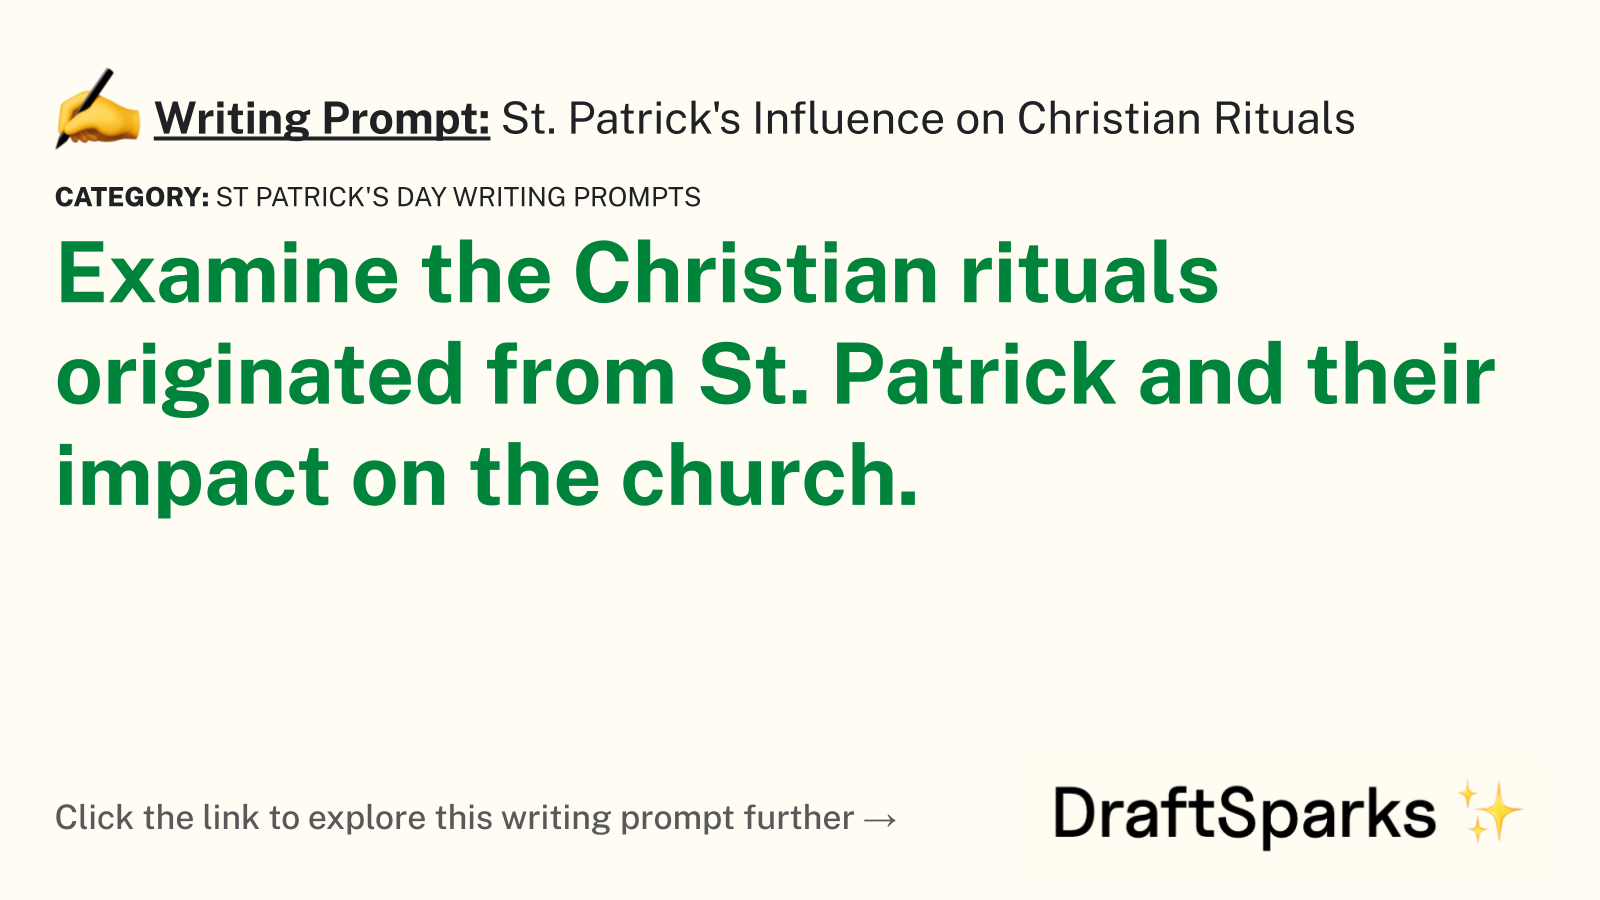 St. Patrick’s Influence on Christian Rituals